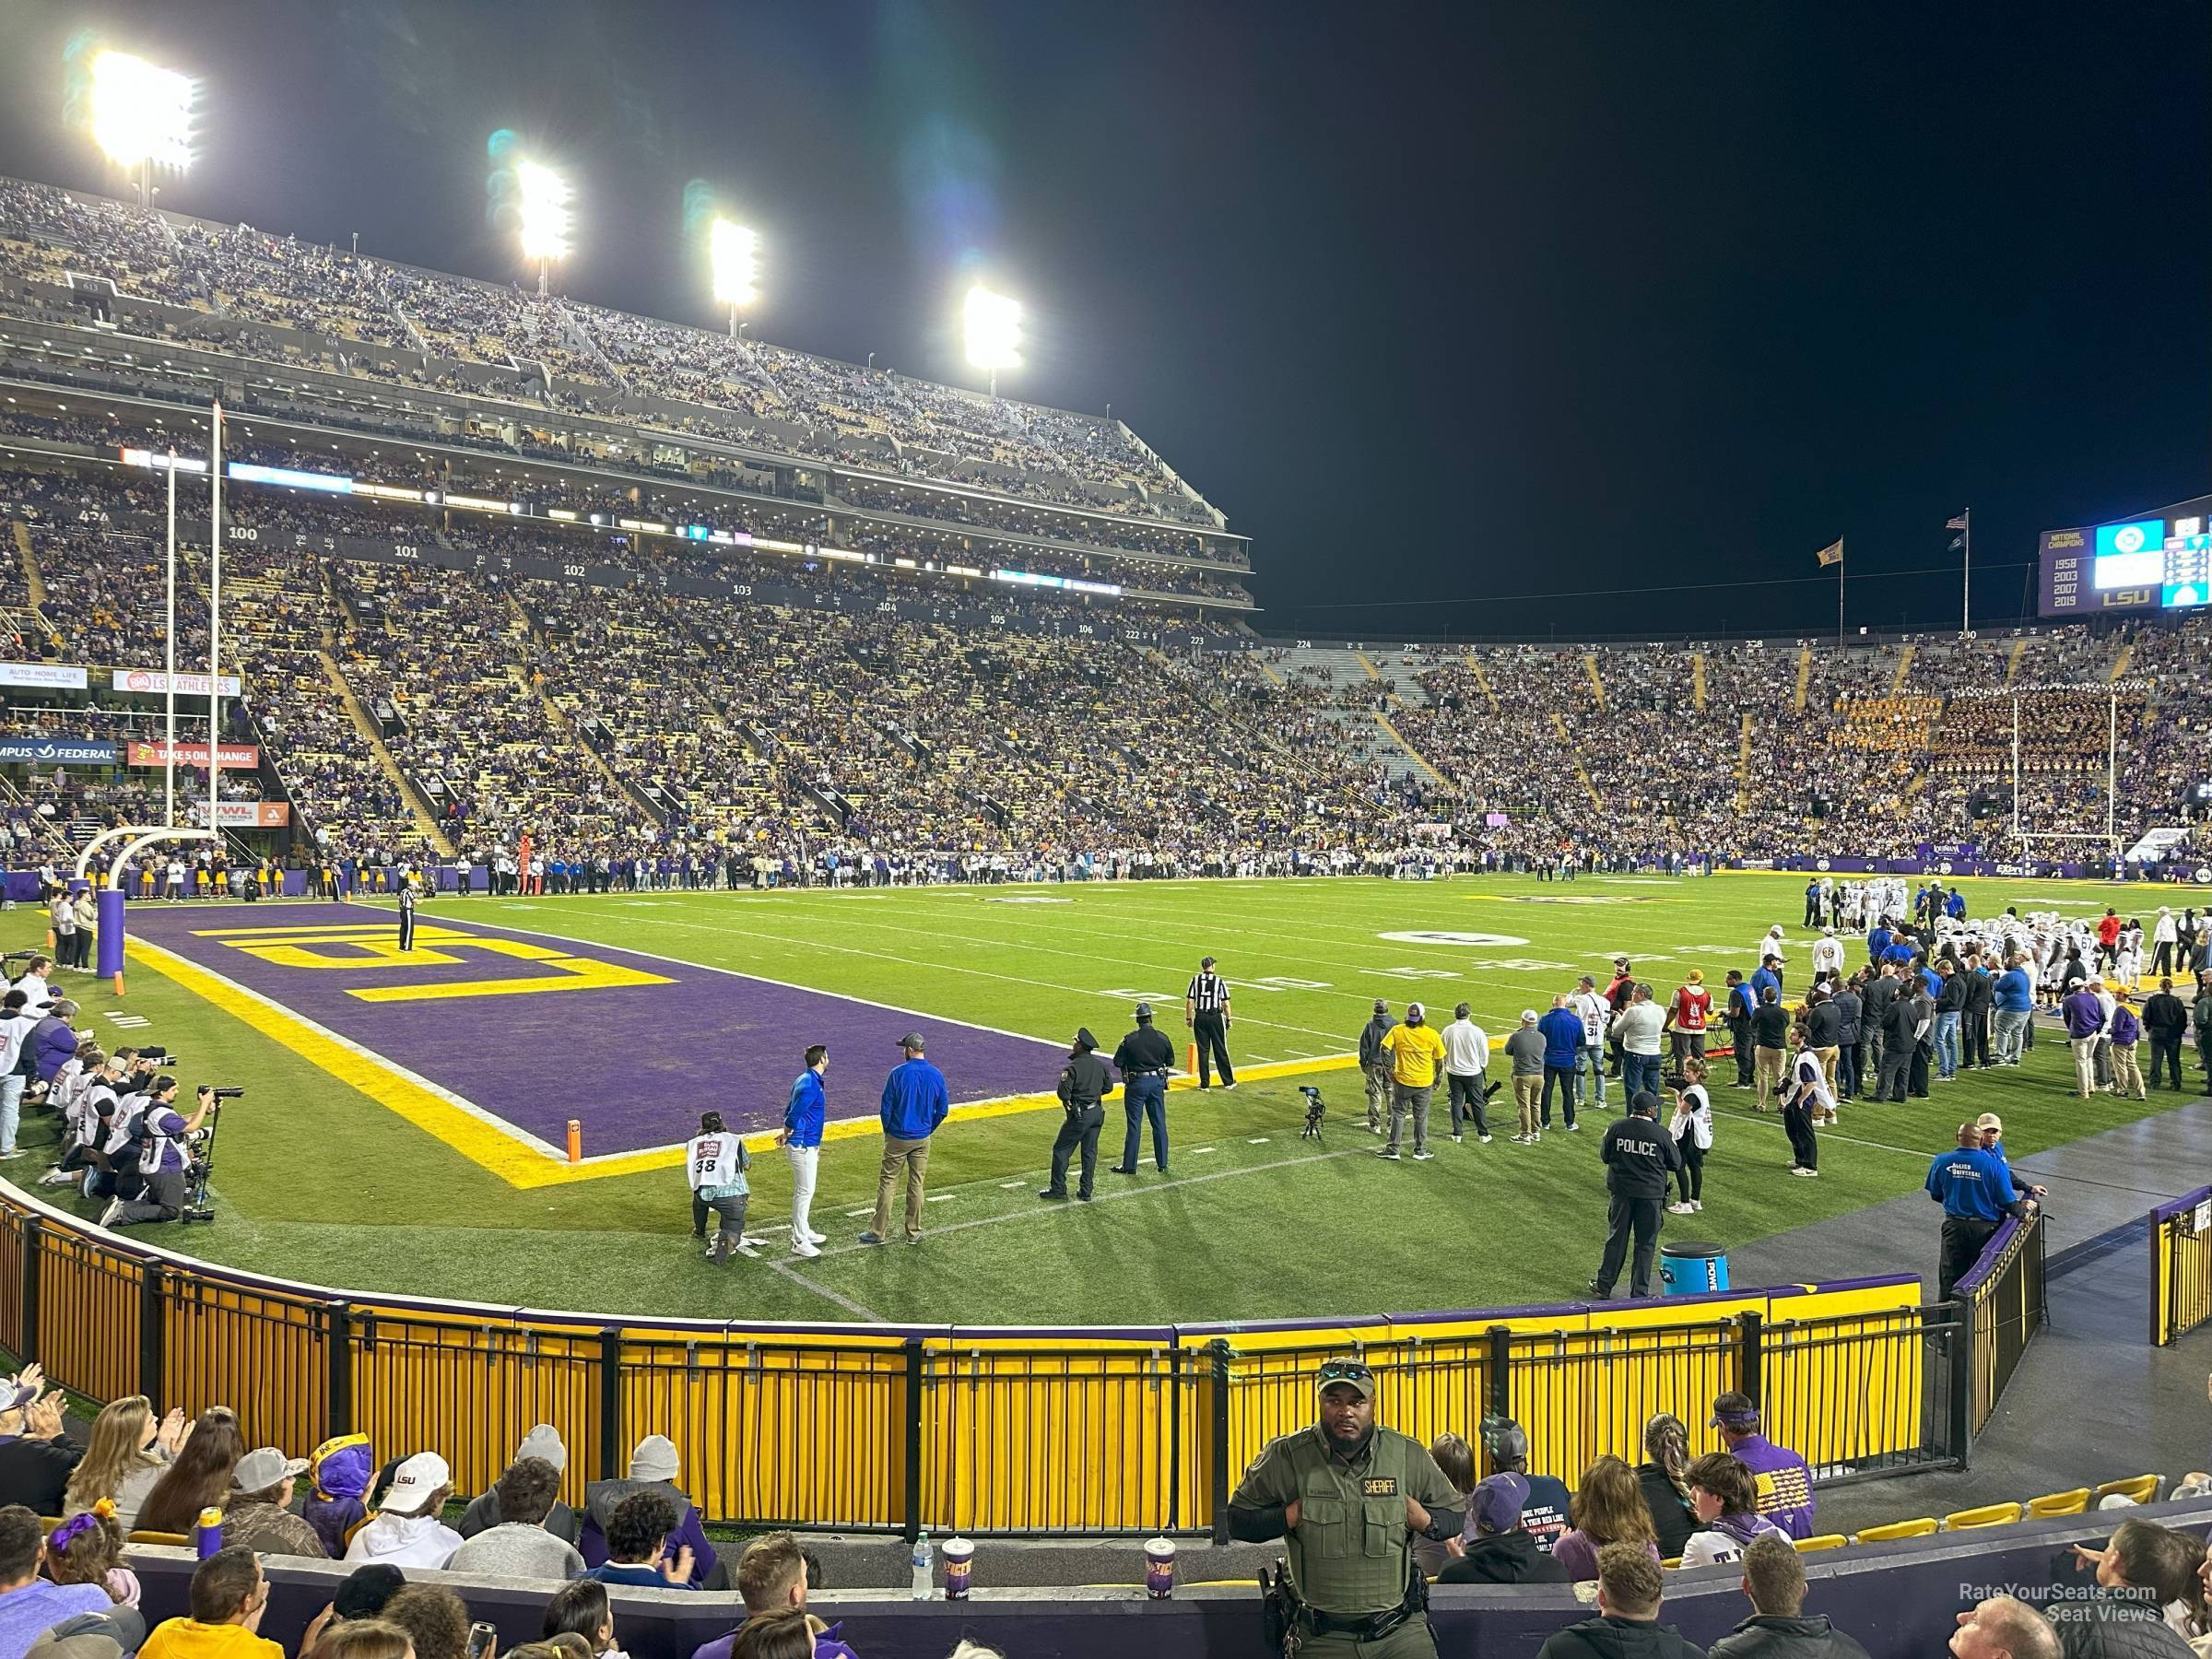 section 402, row 6 seat view  - tiger stadium